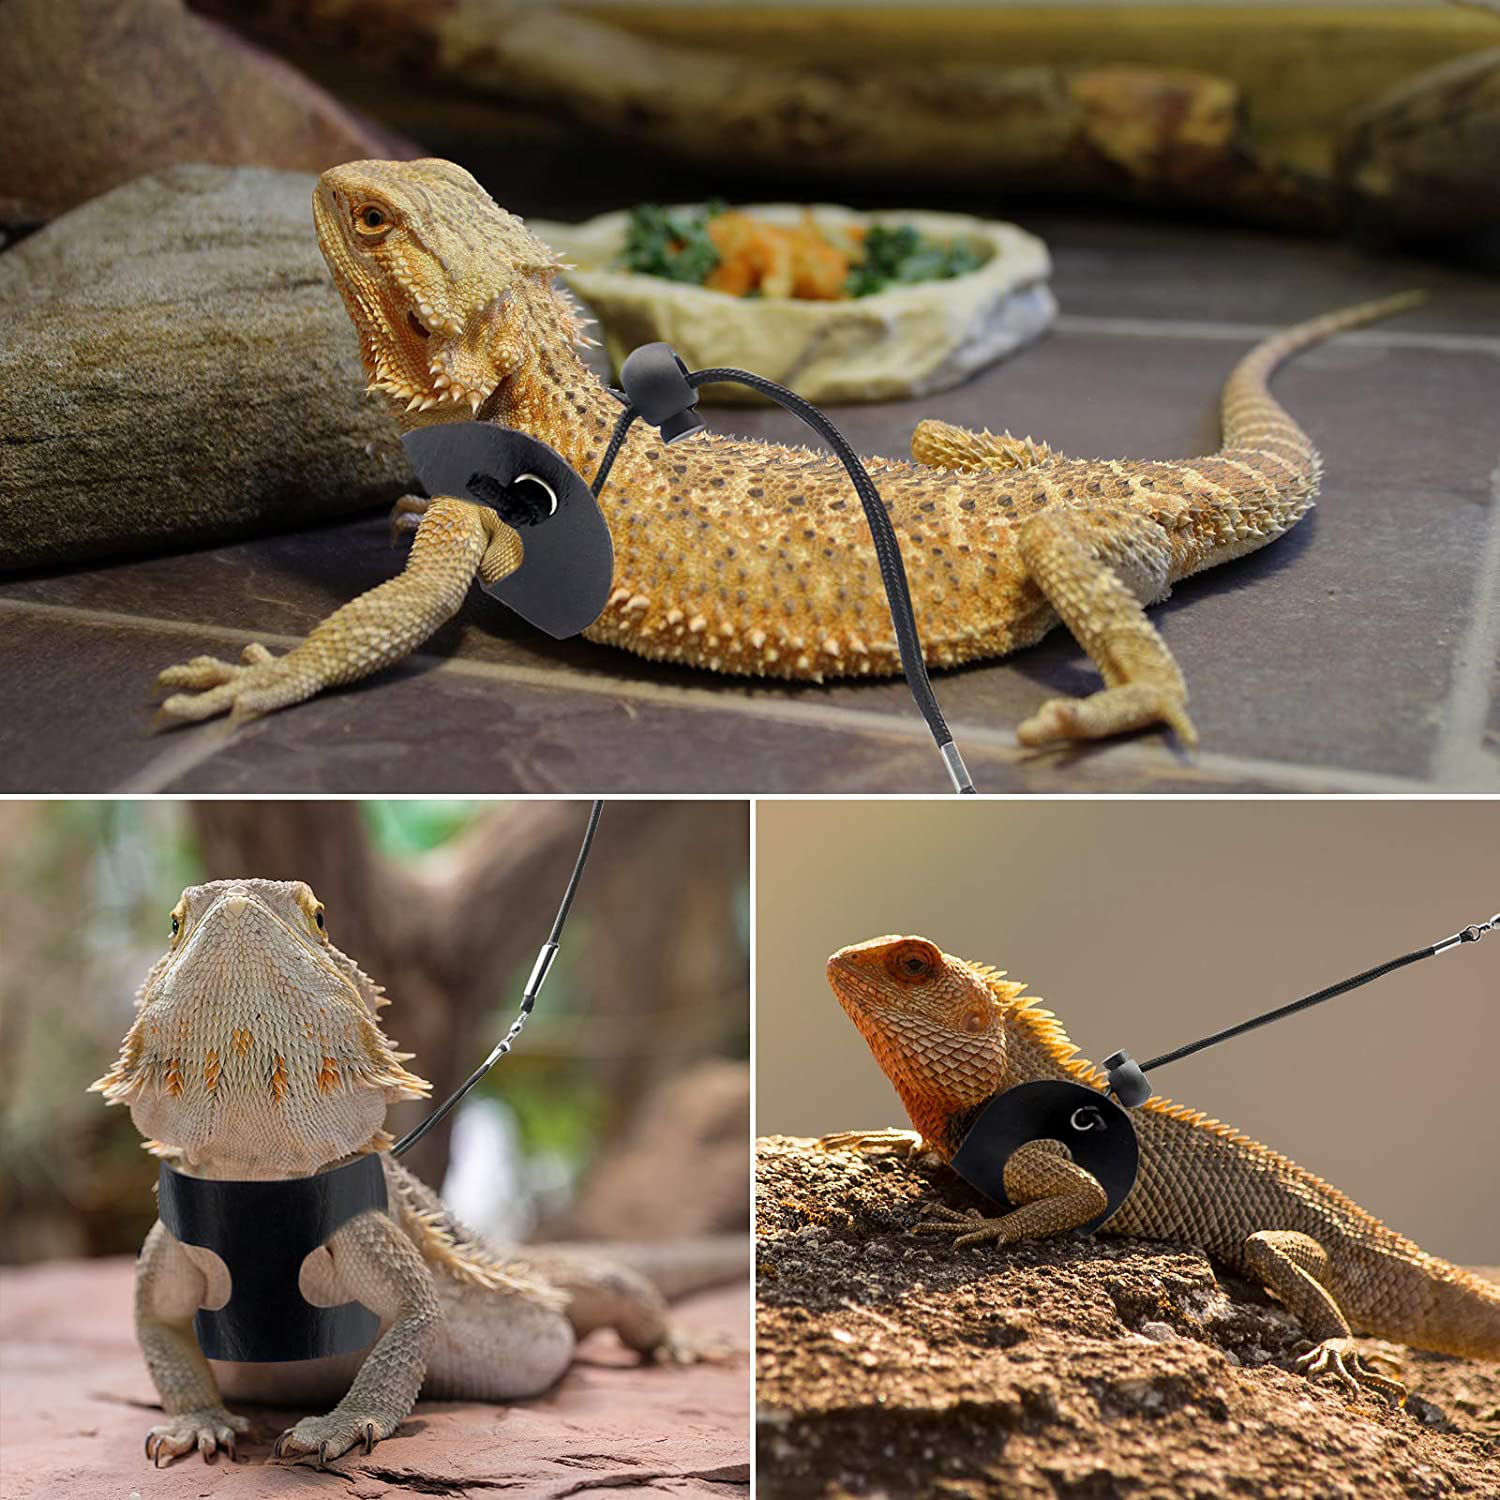 BWOGUE Bearded Dragon Harness and Leash Adjustable Leather Lizard Reptiles Harness Leash for Amphibians and Other Small Pet Animals (S,M,L,3 Pack) Animals & Pet Supplies > Pet Supplies > Reptile & Amphibian Supplies > Reptile & Amphibian Habitat Accessories BWOGUE   